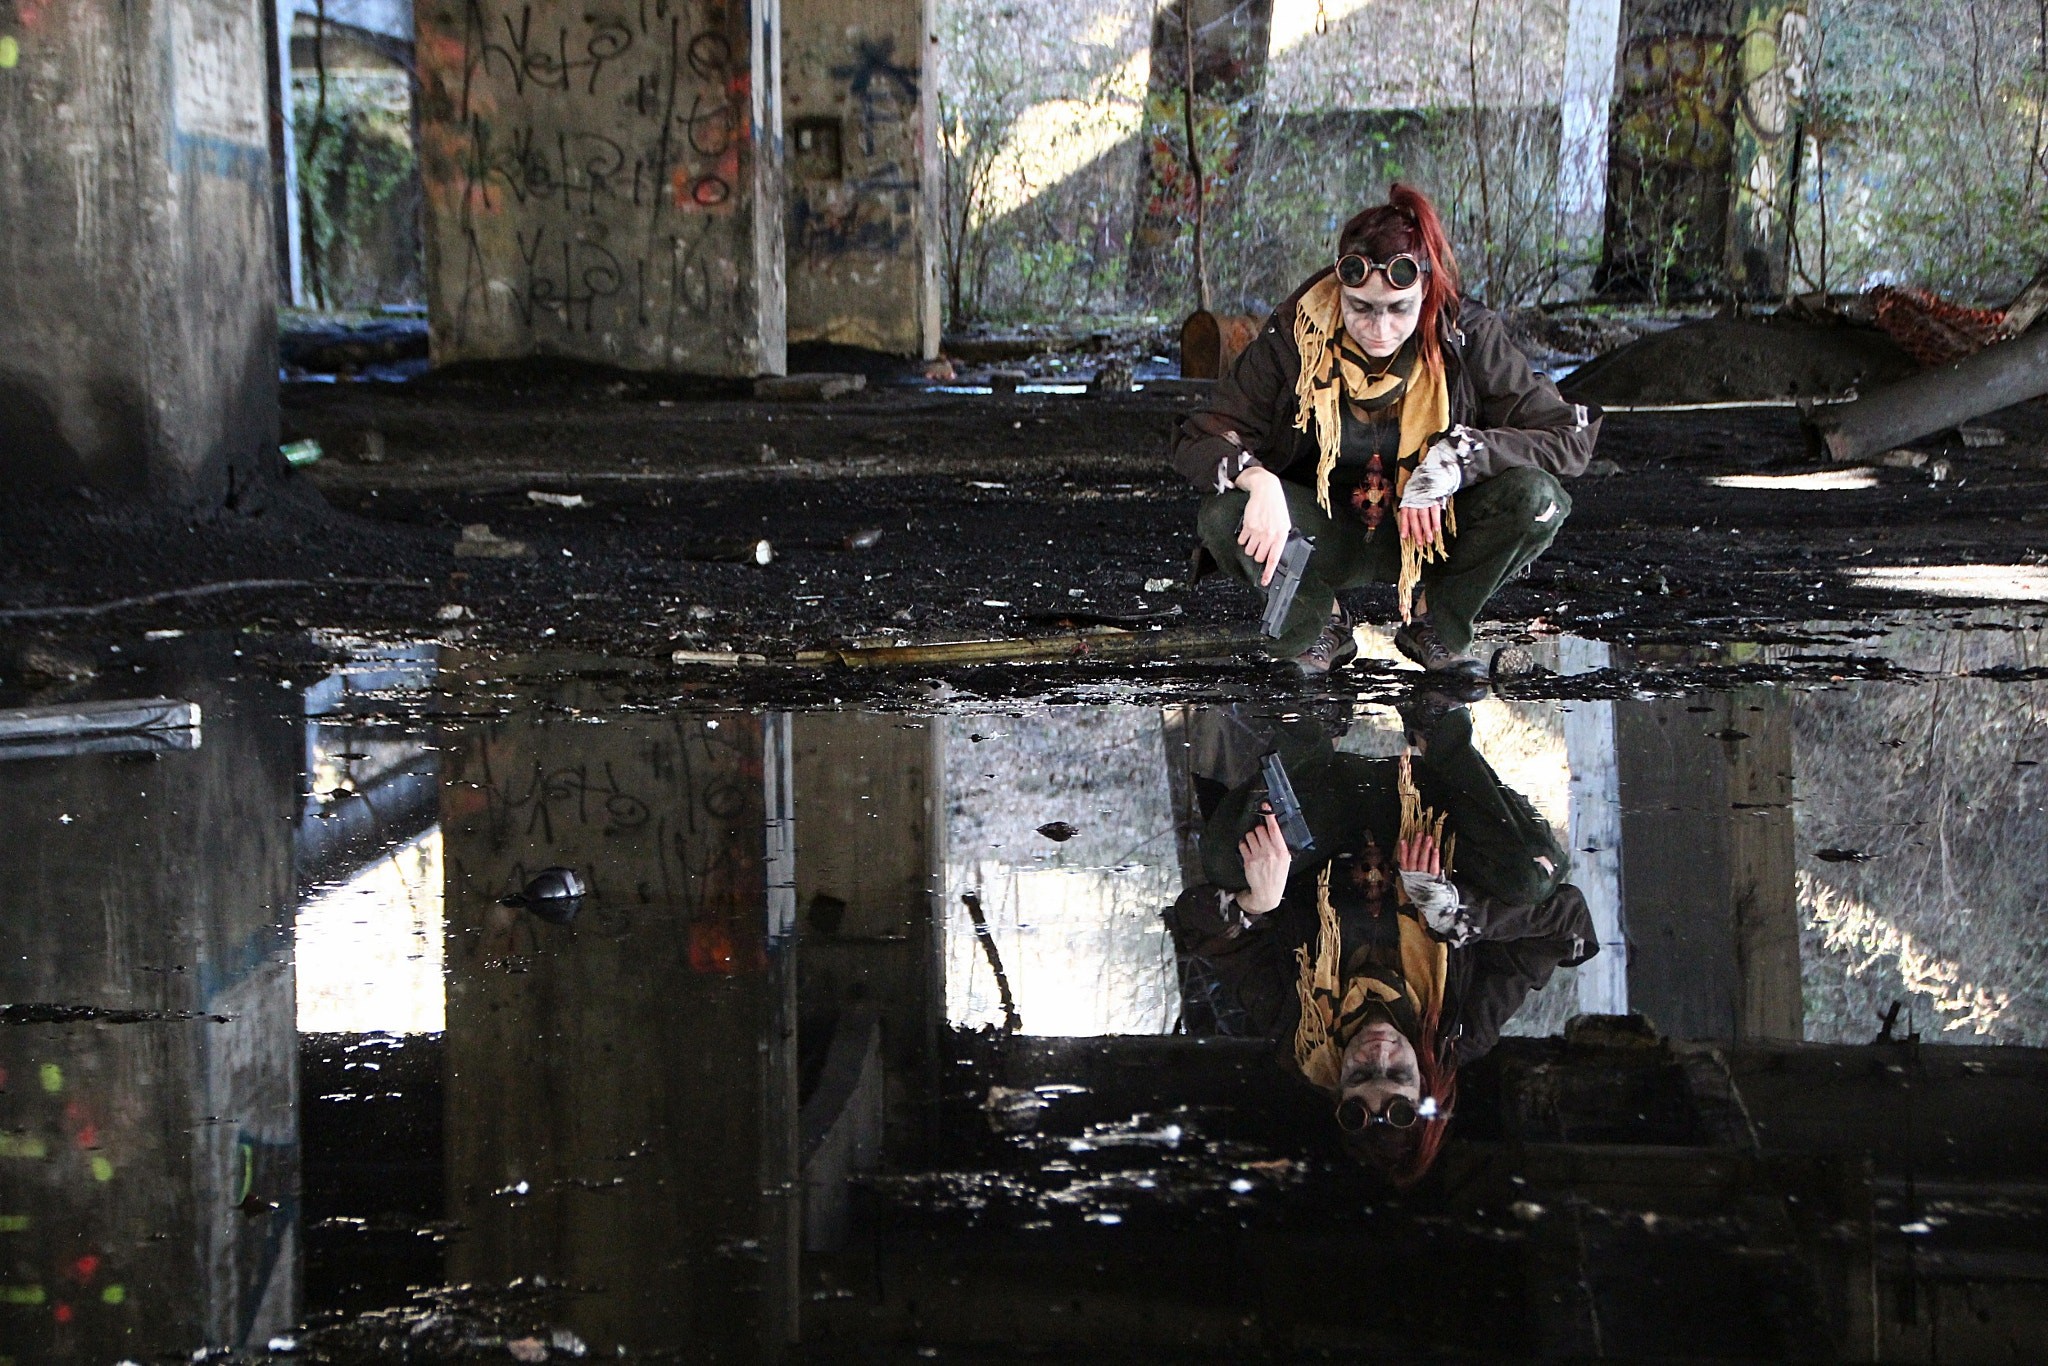 People 2048x1366 gun 500px apocalyptic women ruins abandoned reflection girls with guns